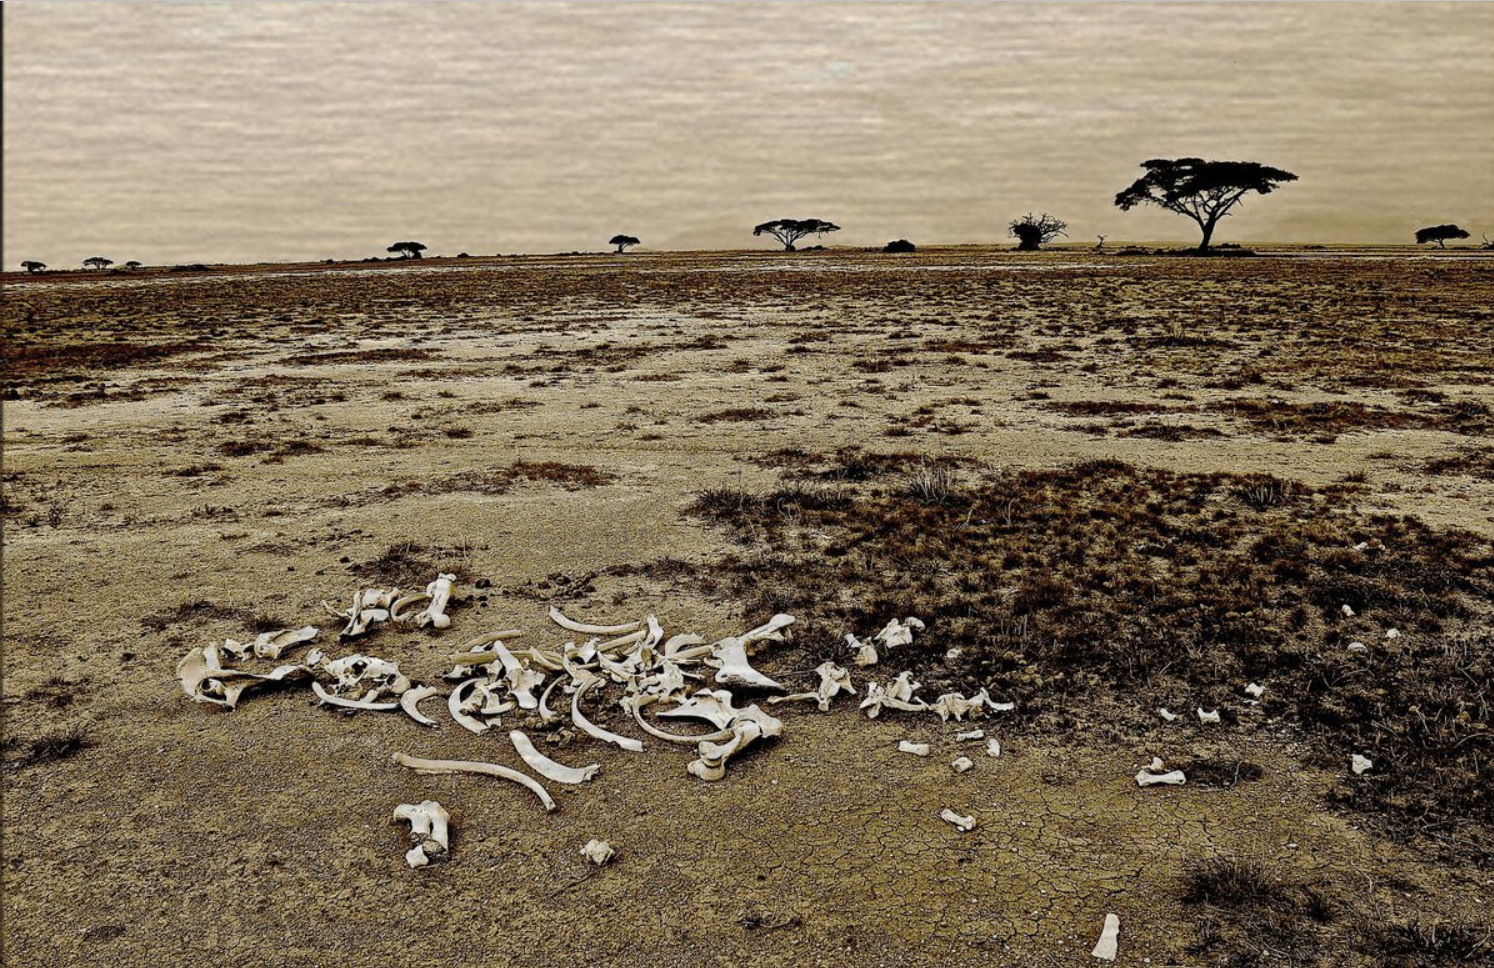 A field with dead animals on it and trees in the background.